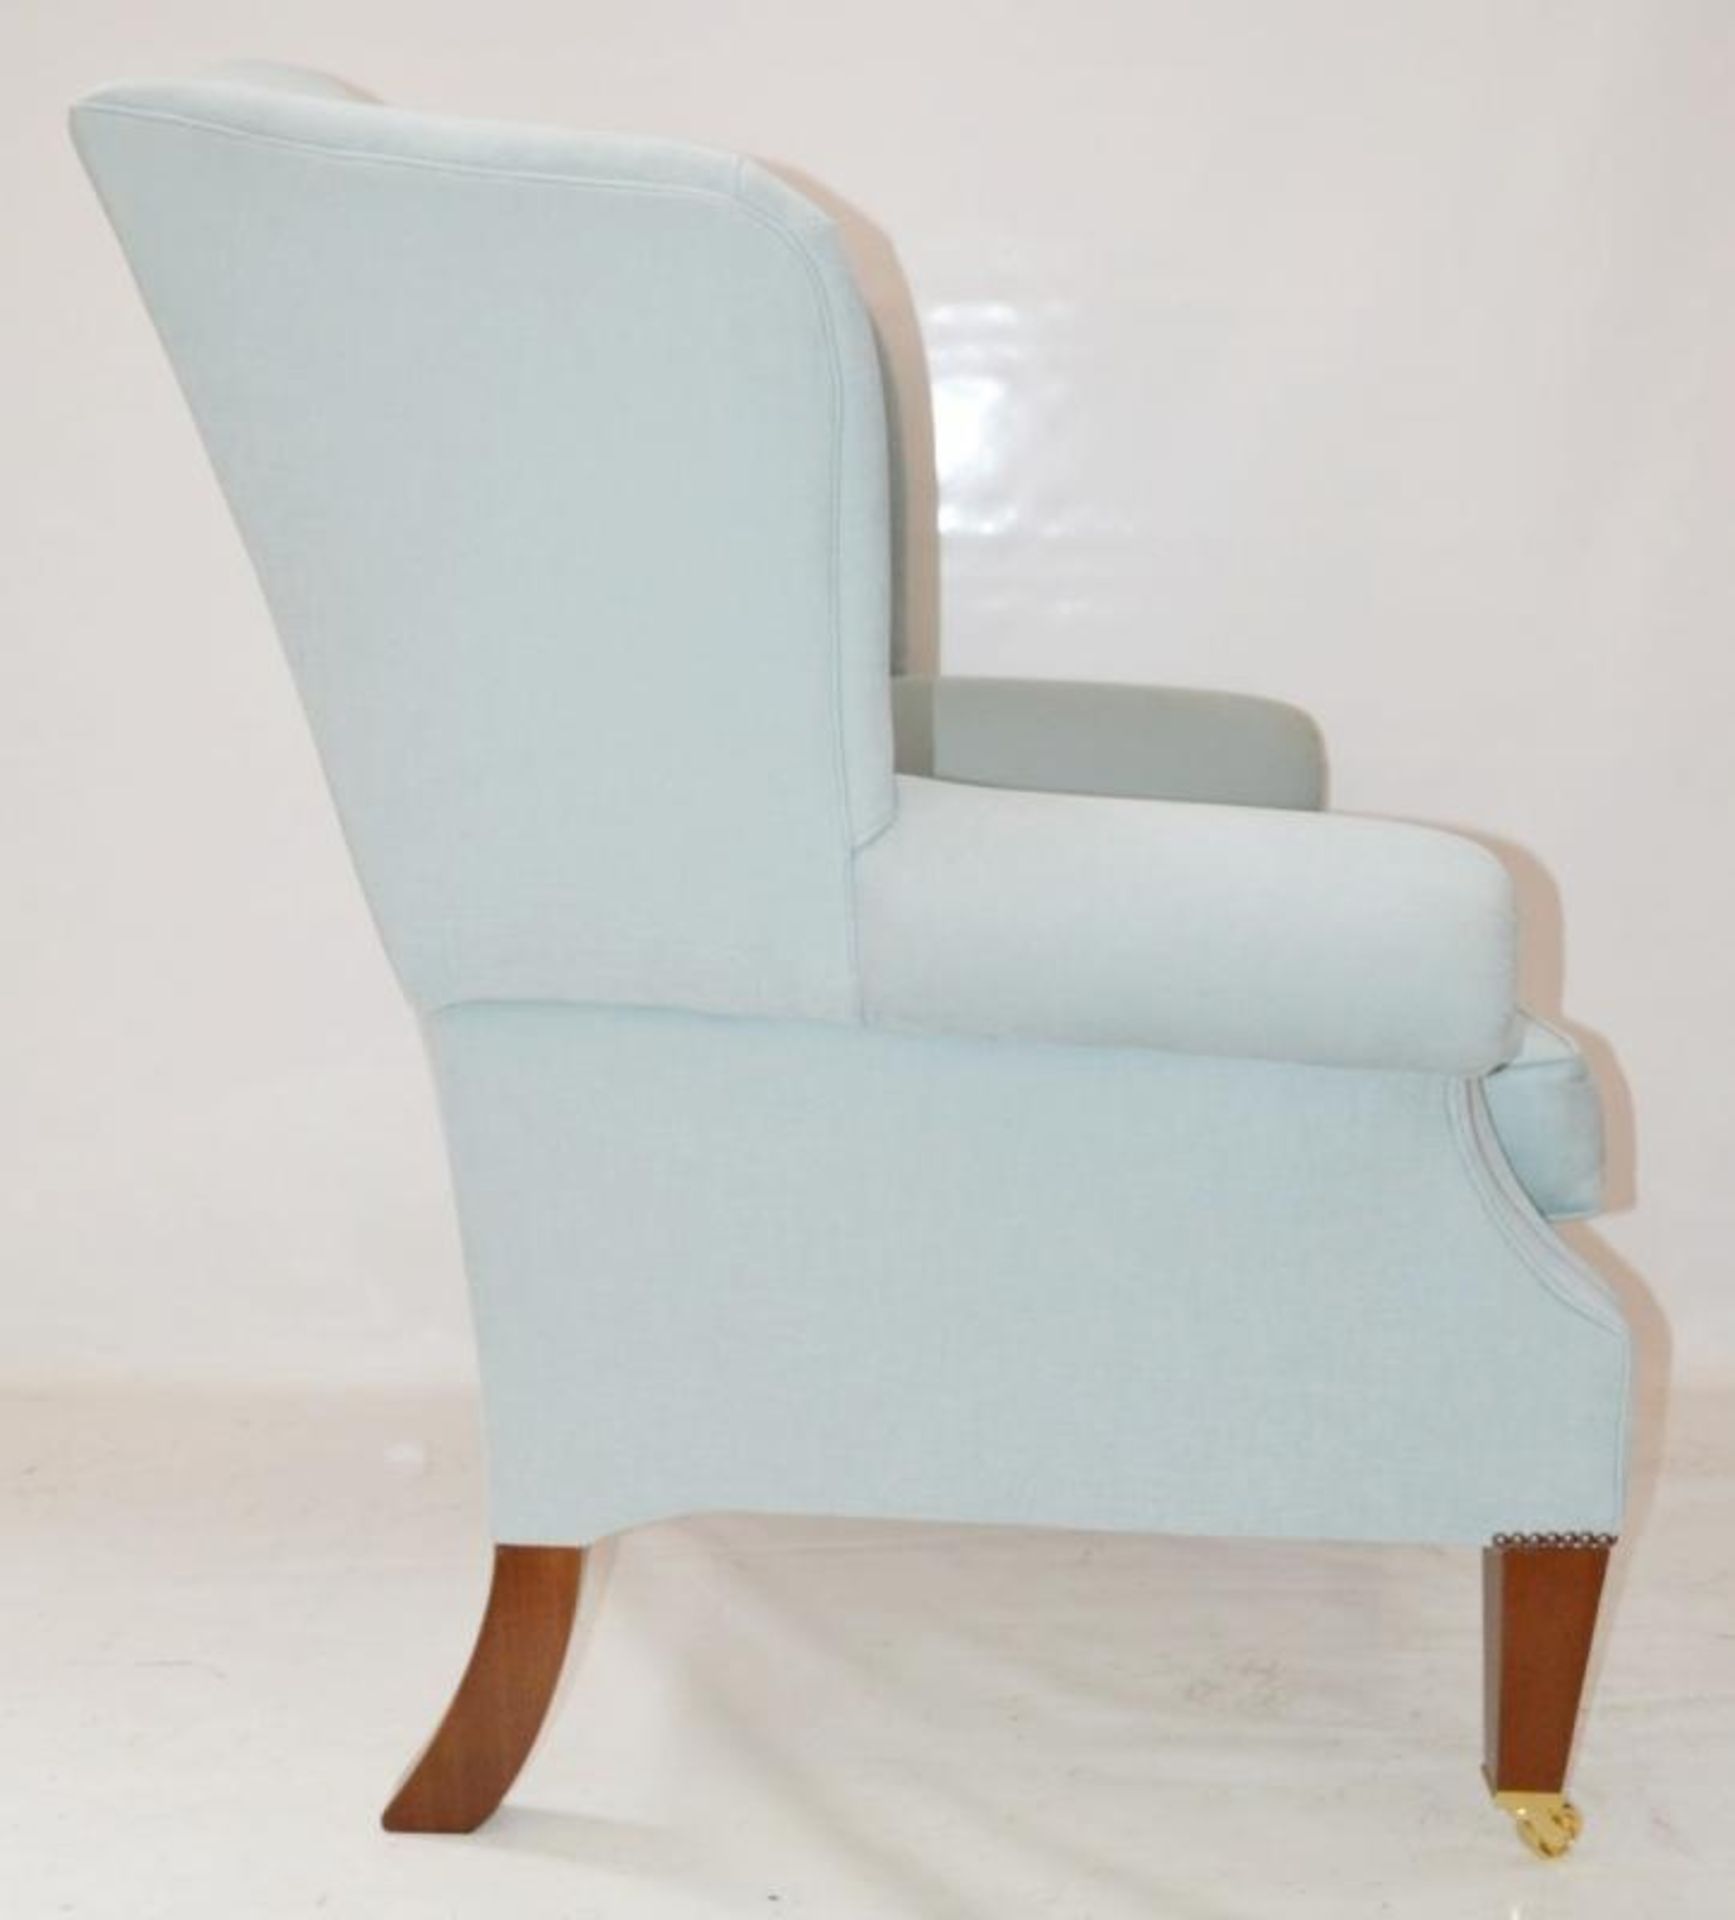 1 x Duresta "Somerset" Wing Chair Light Blue - Dimensions: 113H x 91W x 92D cms - Ref: 3143184-A NP1 - Image 3 of 7